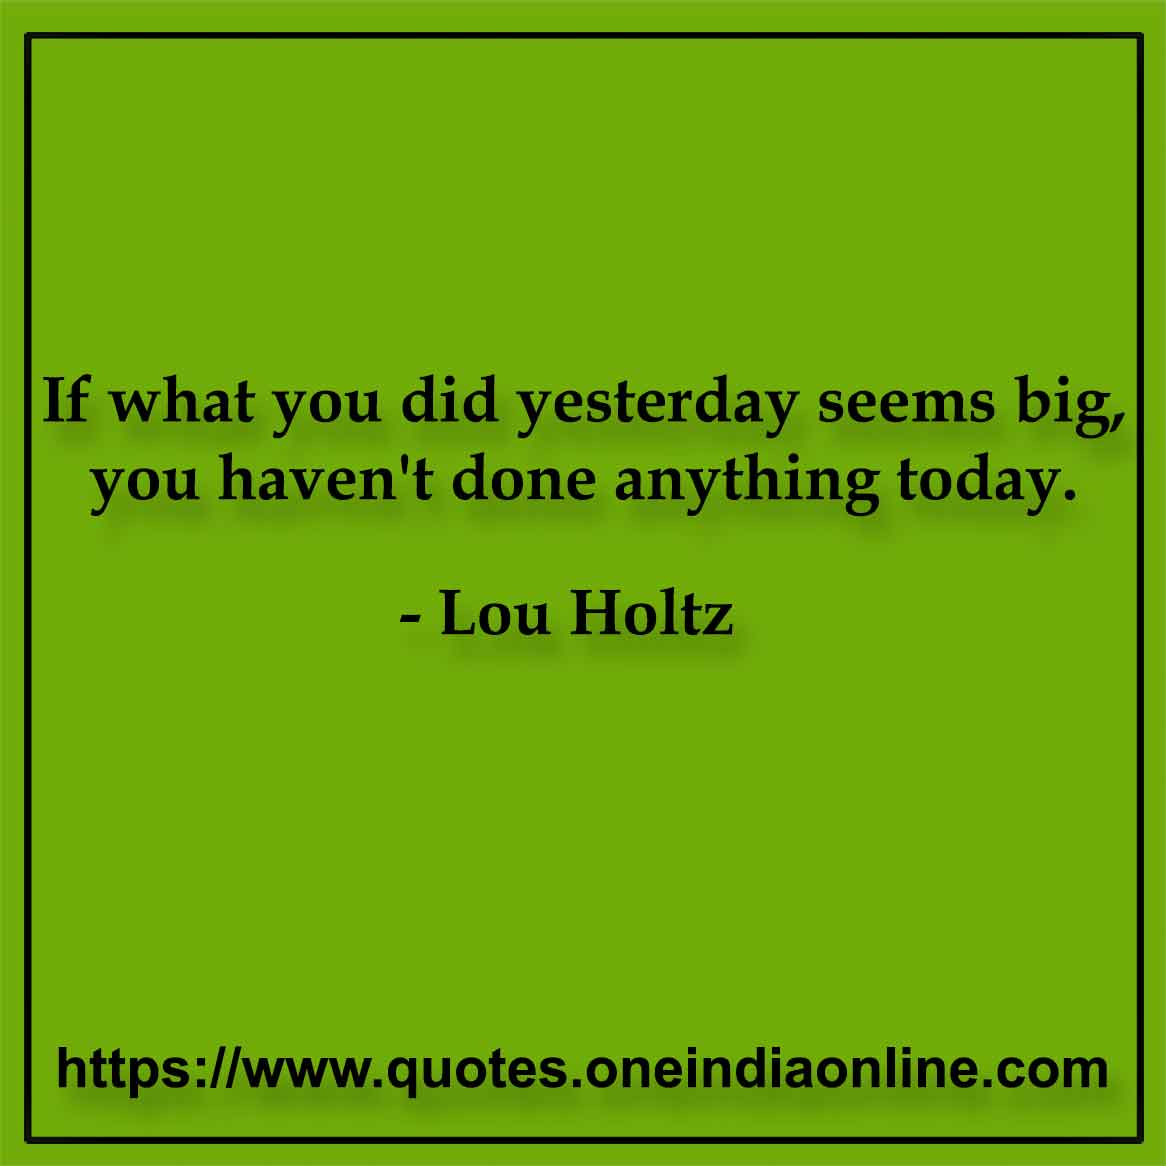 If what you did yesterday seems big, you haven't done anything today. Lou Holtz 